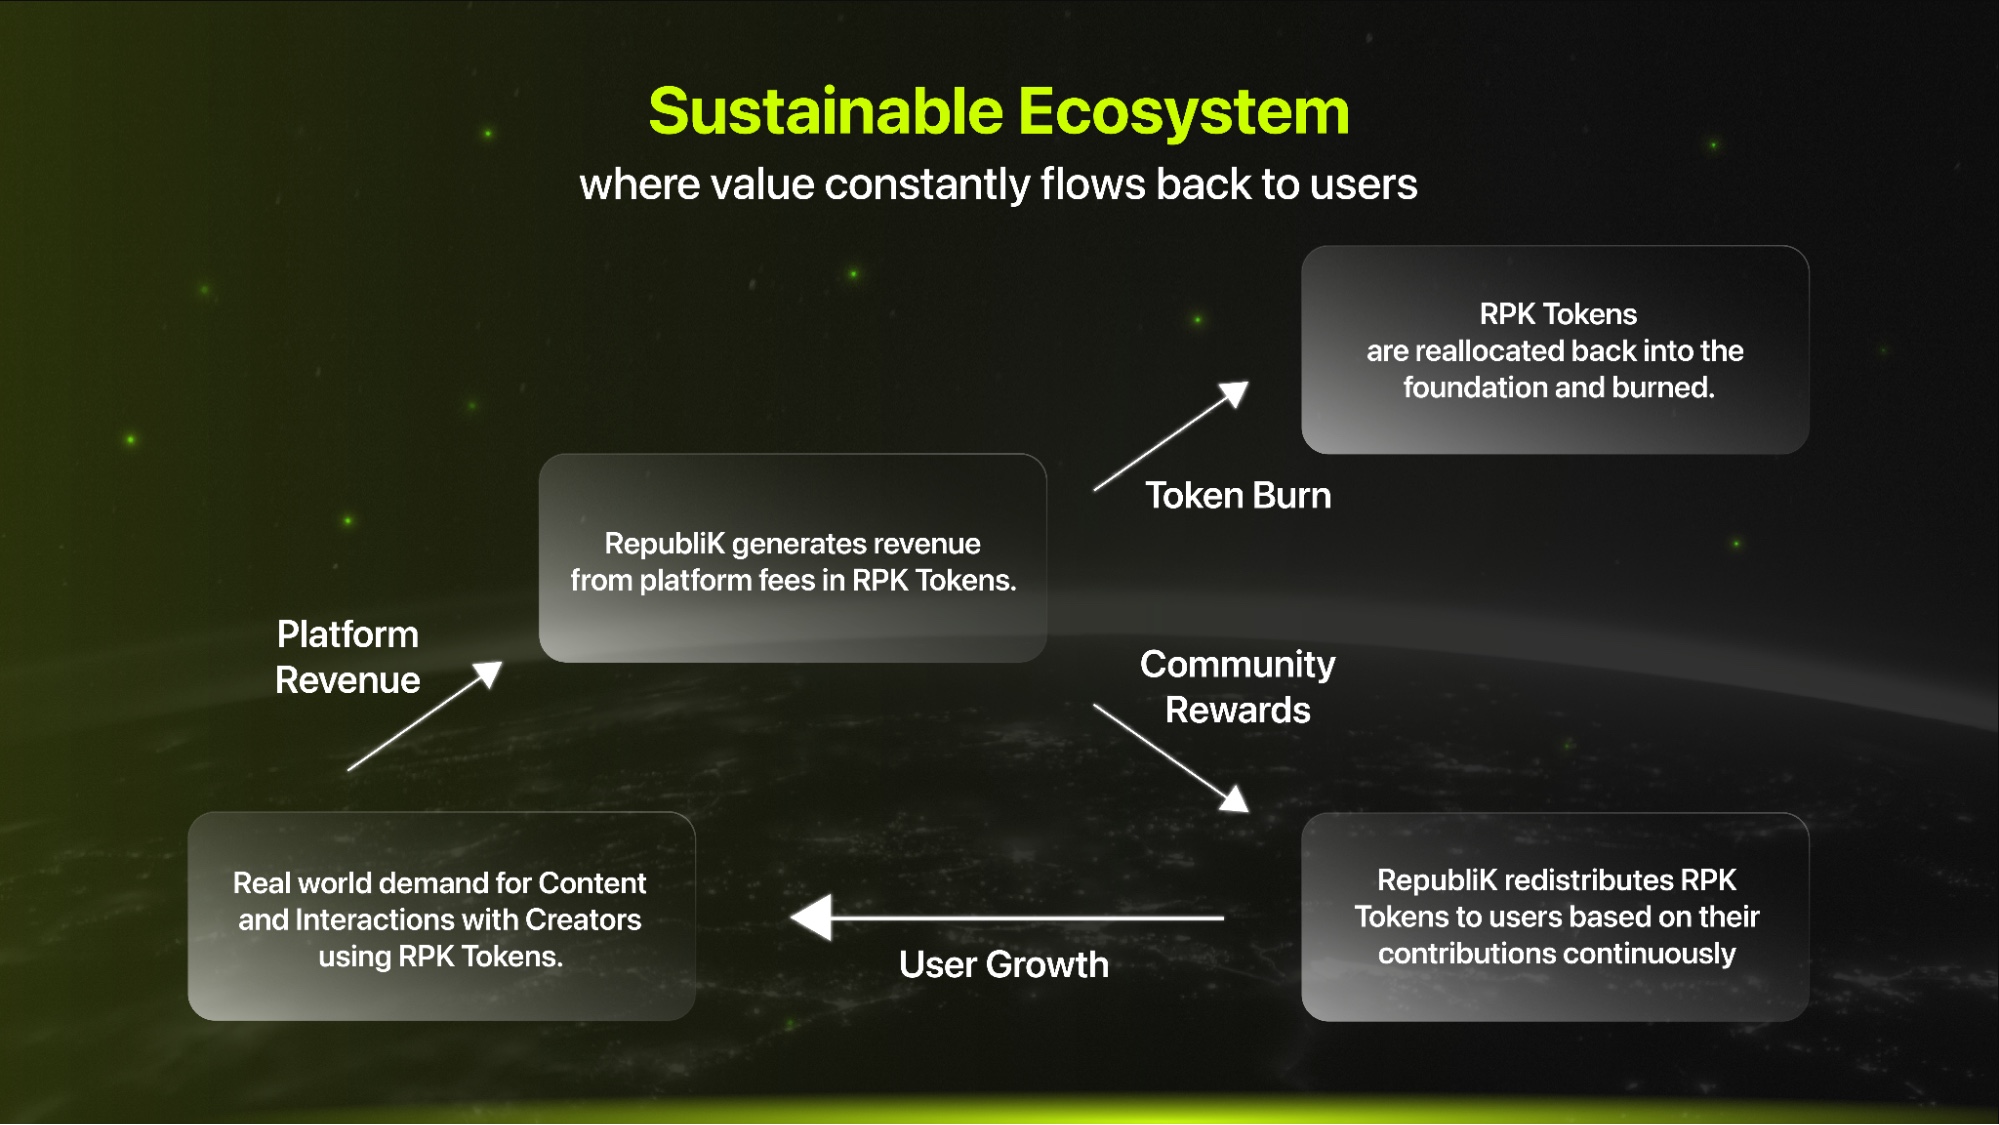 How RepubliK intends to reward its users through a sustainable ecosystem. Source: RepubliK